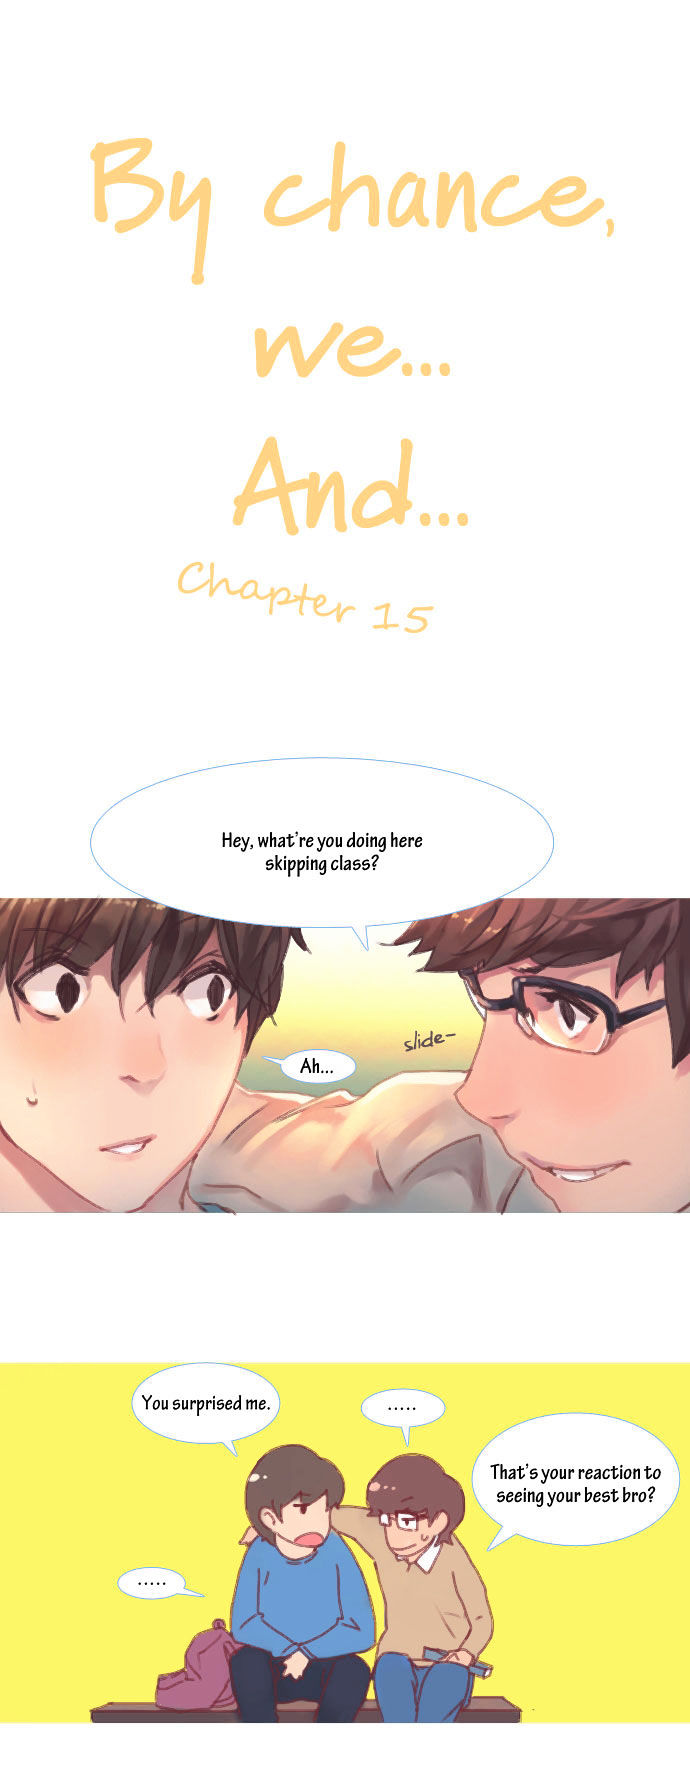 By Chance, We... And... Chapter 15 #6